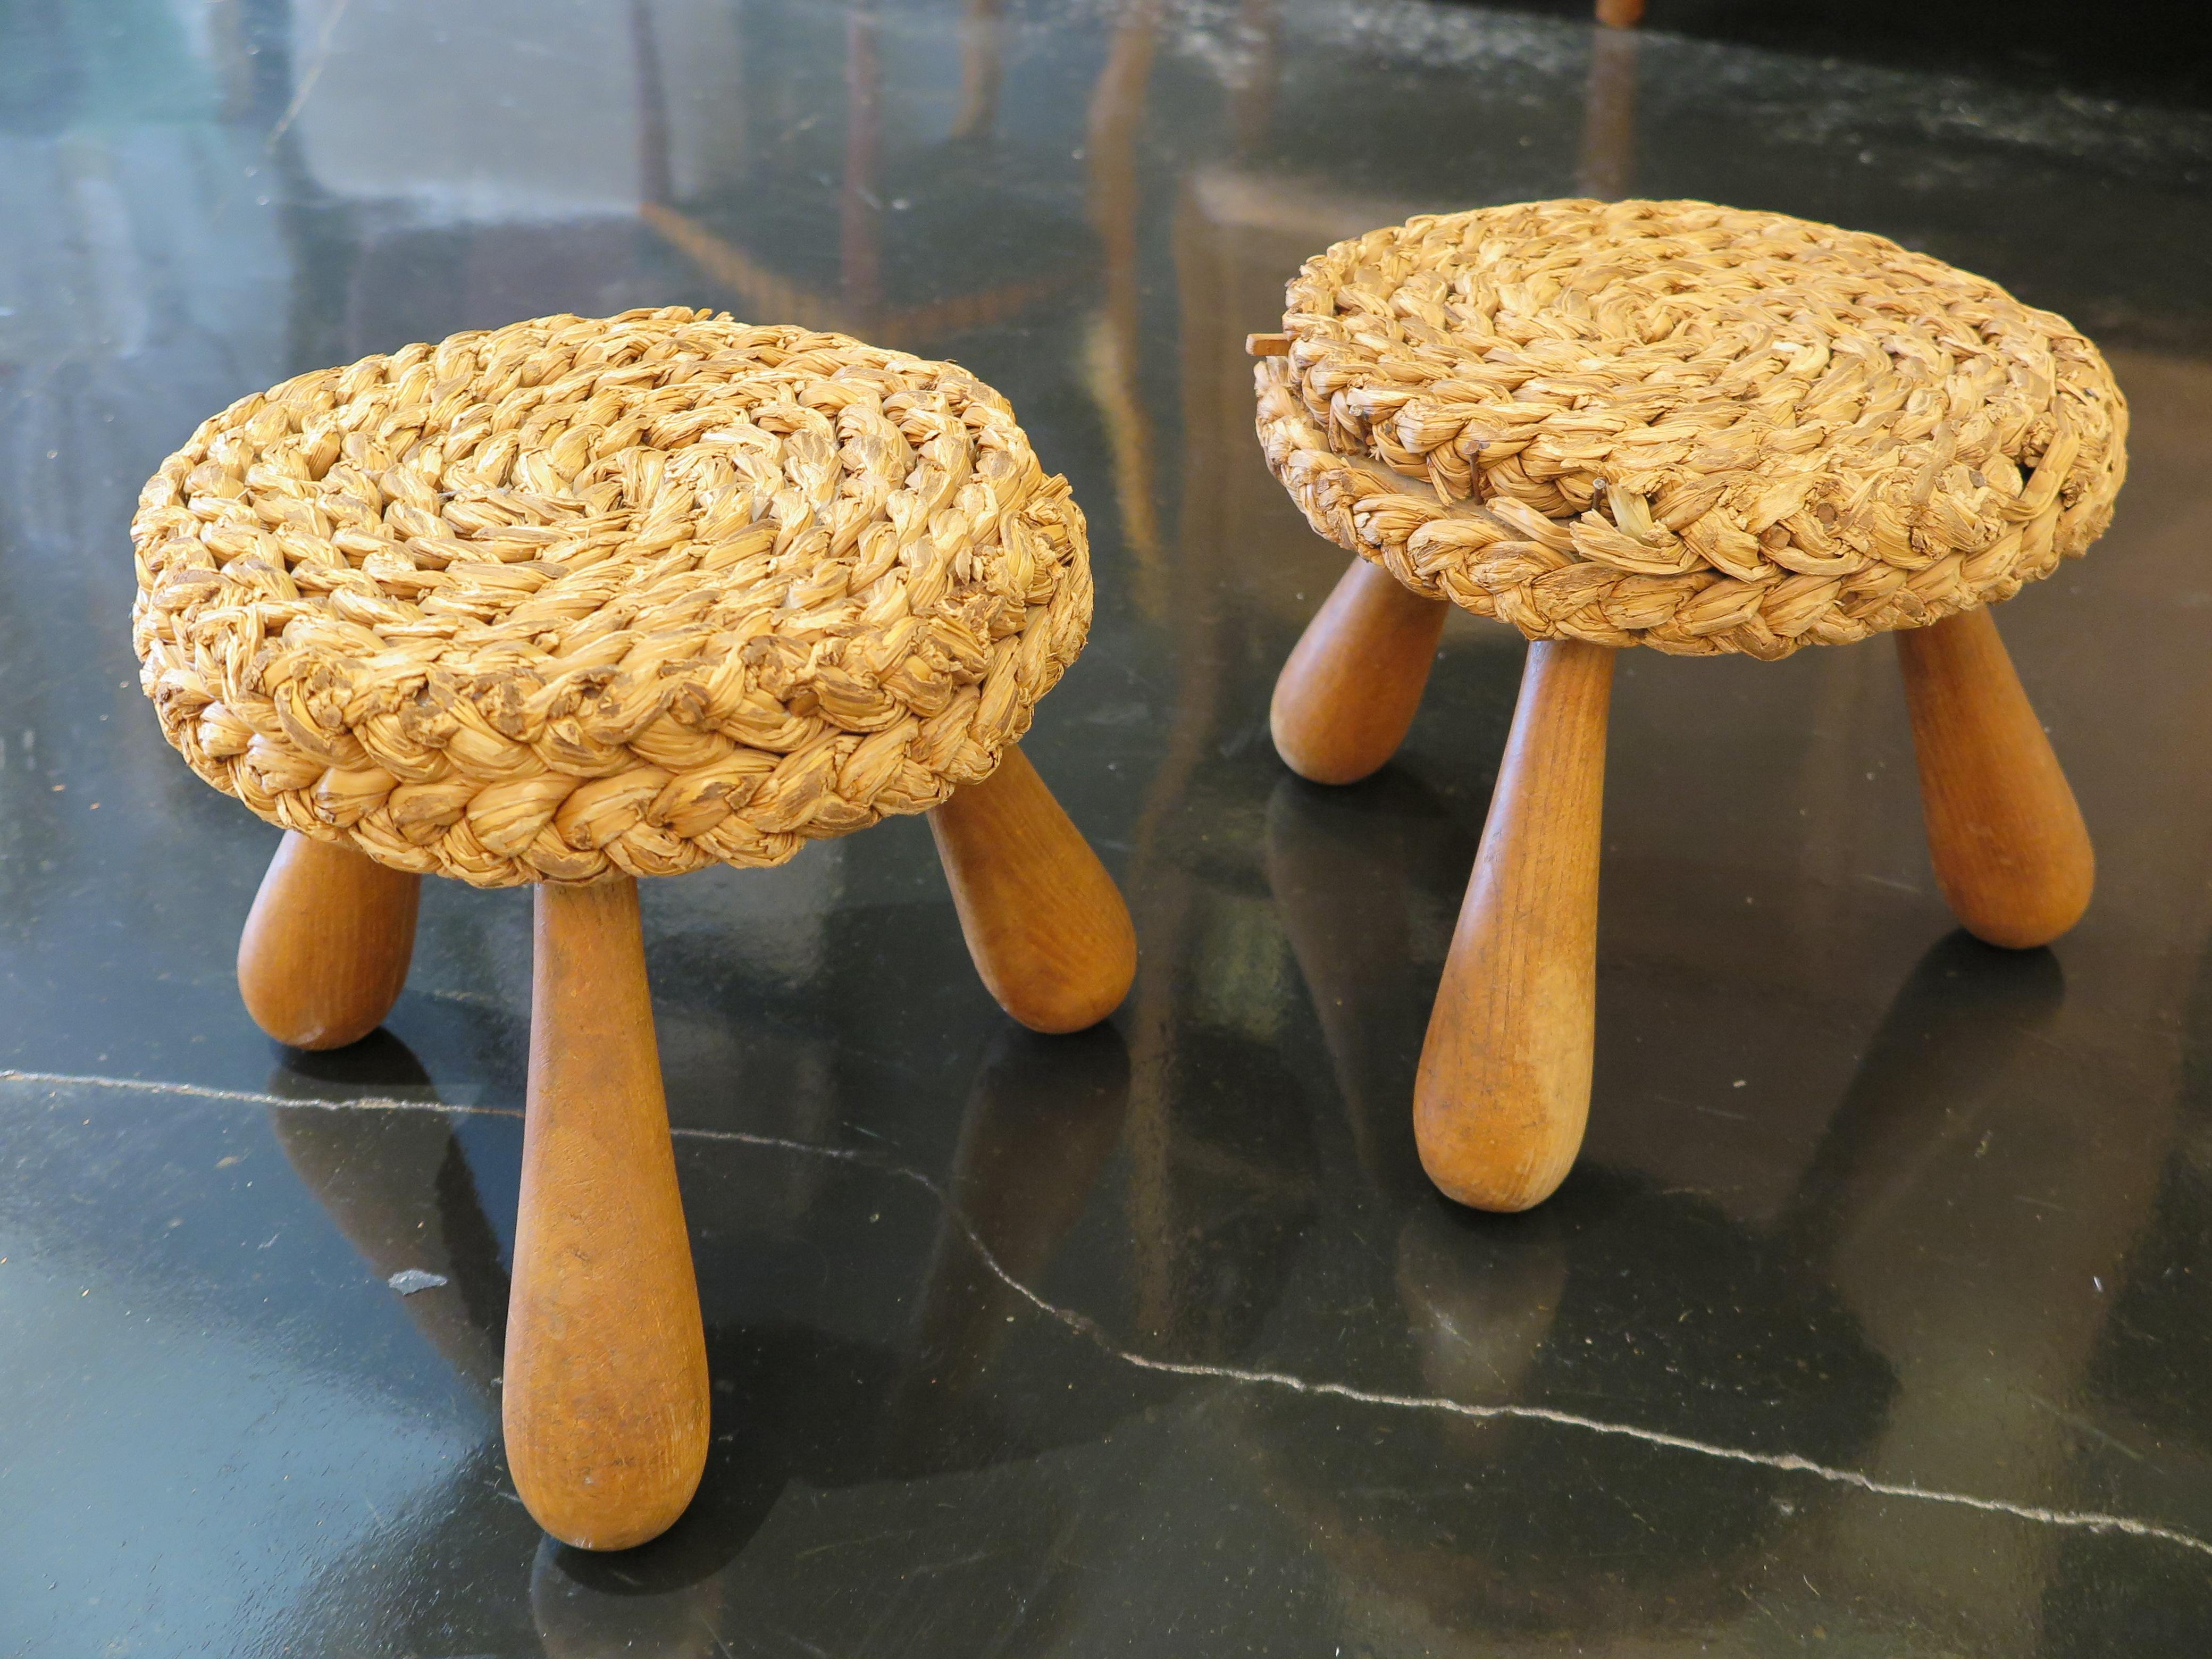 Pair of French mid-century low Shepard's stools by Adrien Audoux and Frida Minet. The rustic French poufs feature round seats in woven raffia/rattan with tripods legs and an oak keel base. Original condition.